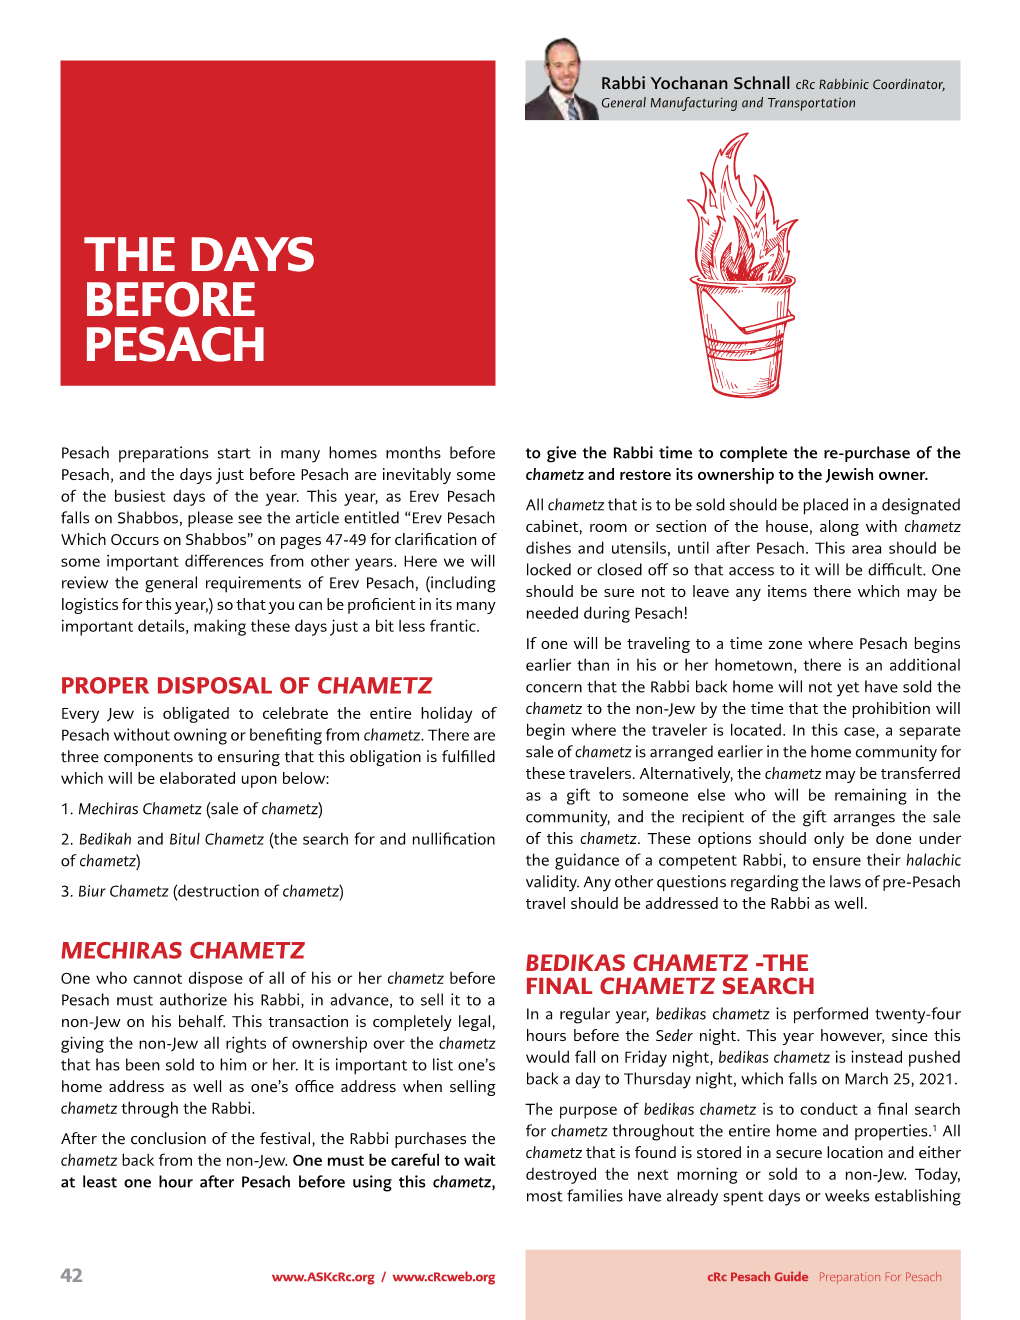 The Days Before Pesach